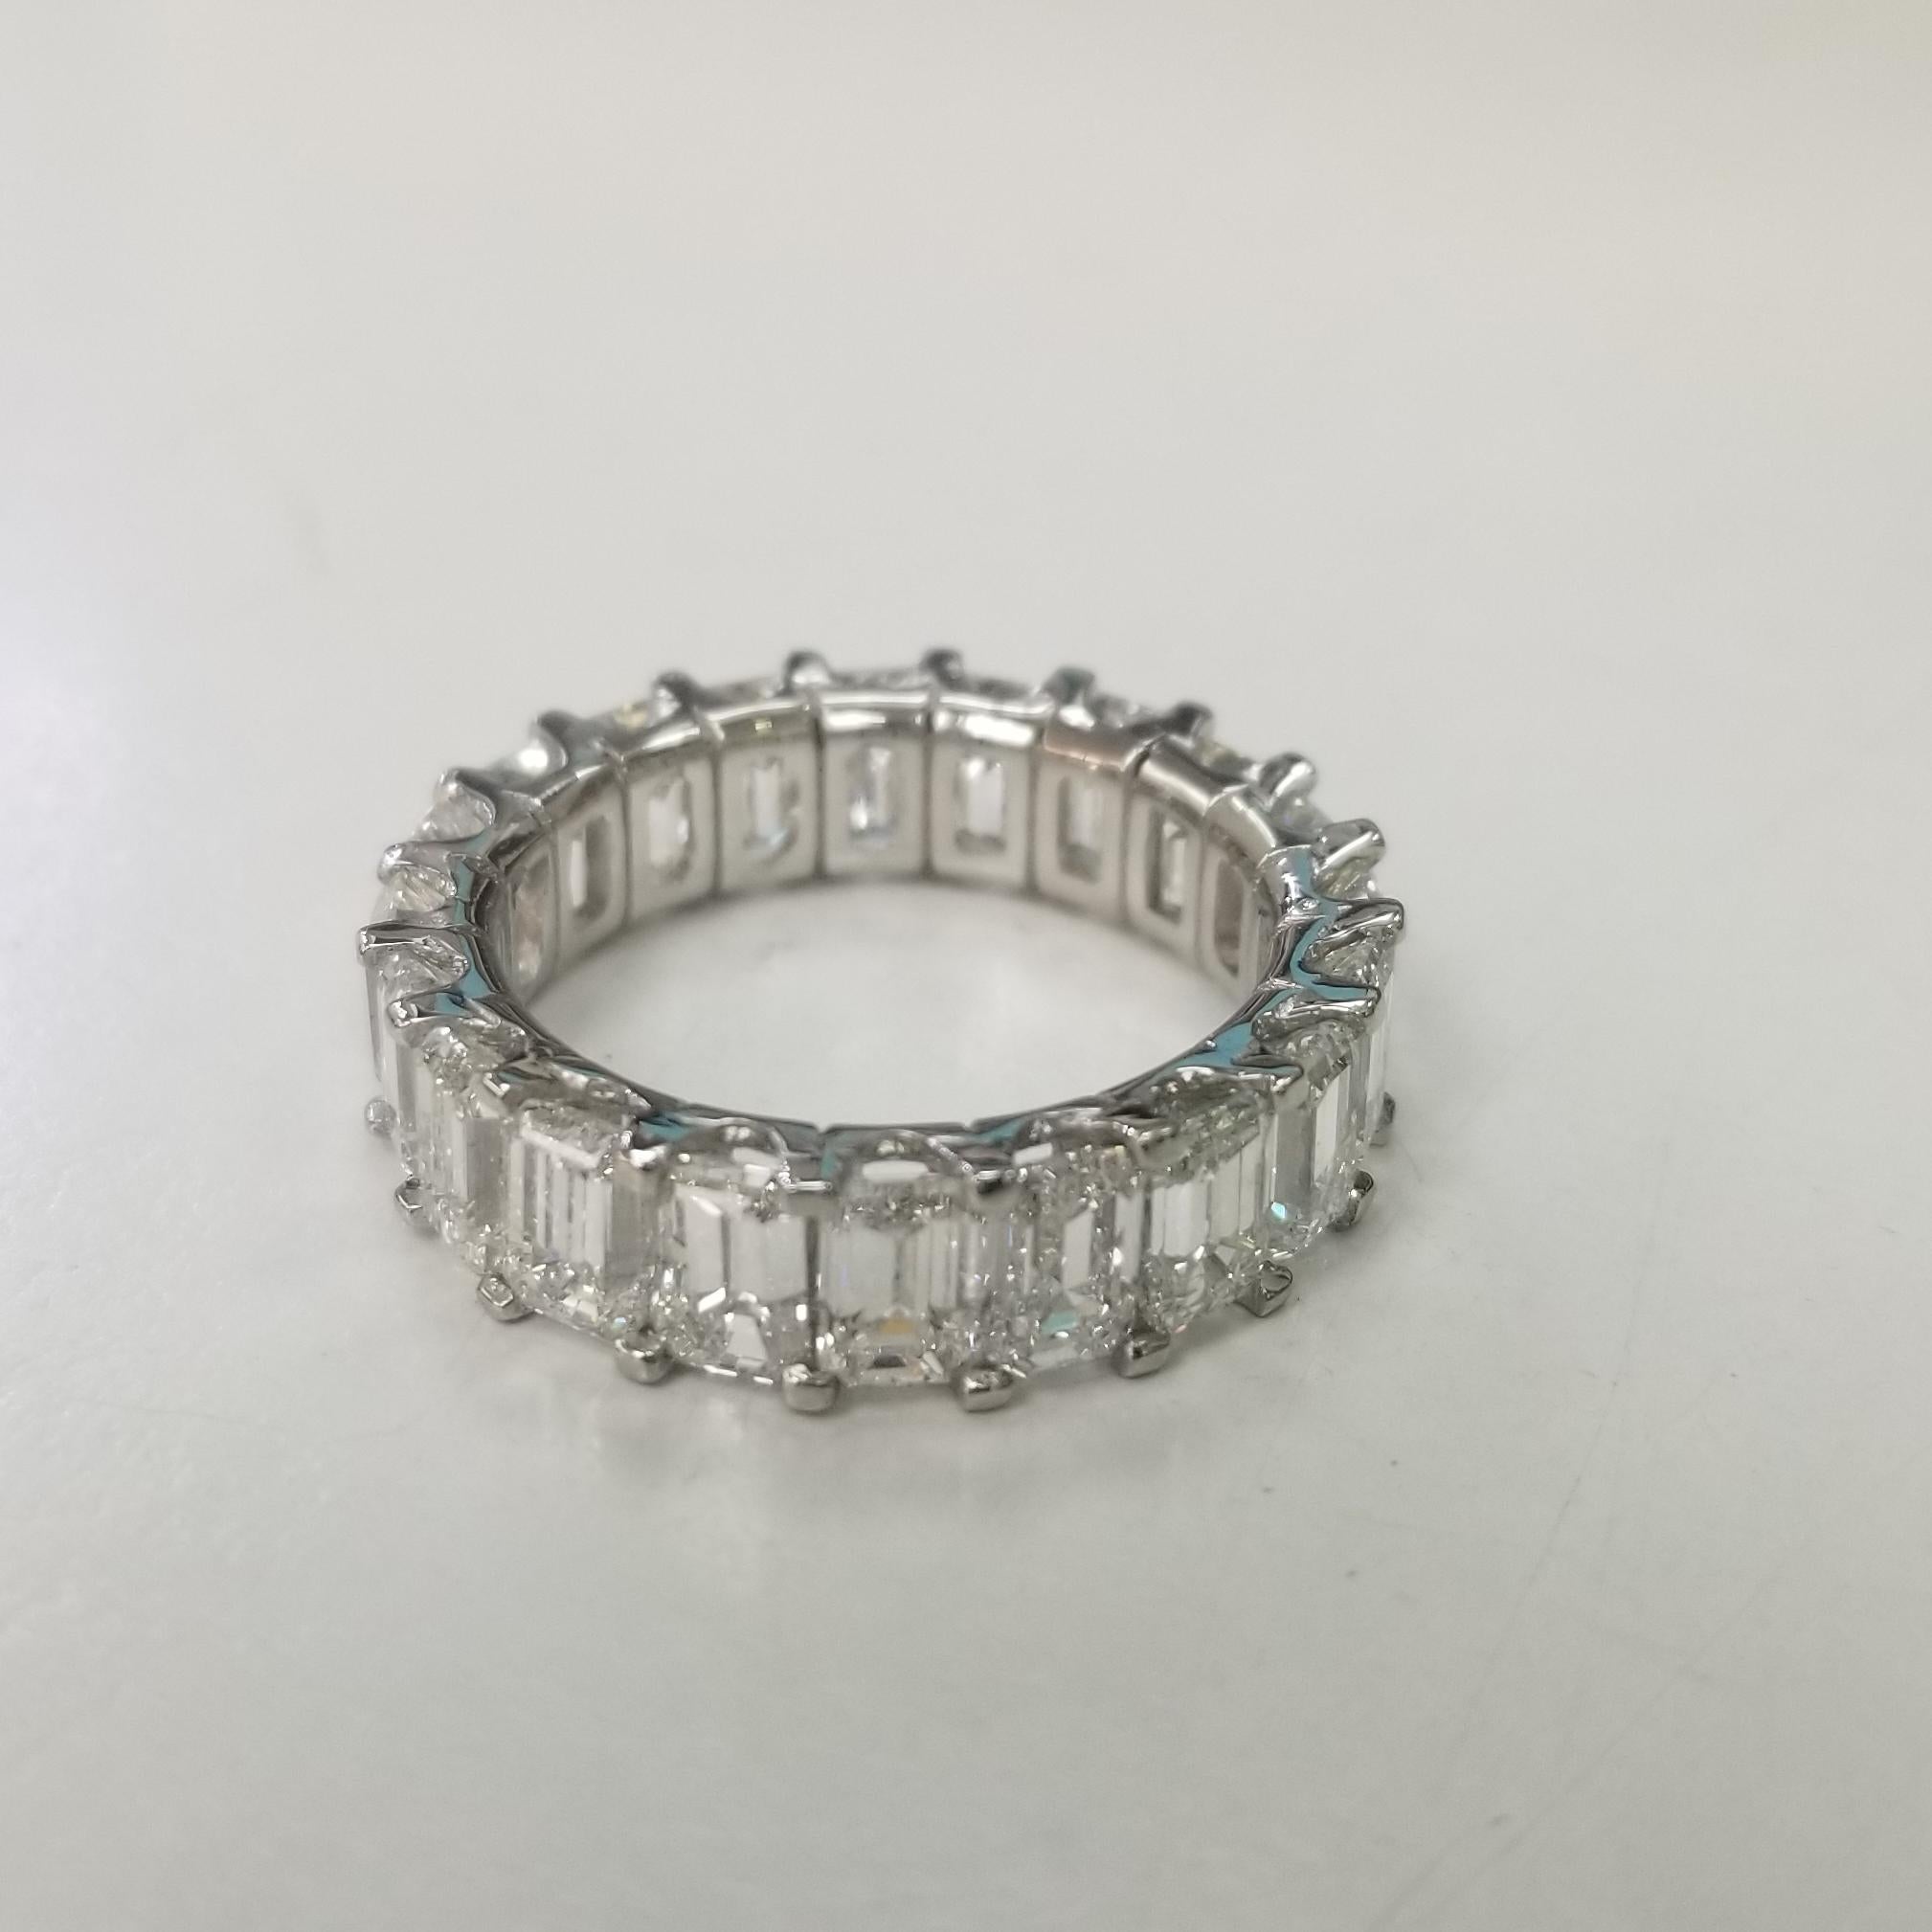 This diamond eternity ring is an endless commitment of love.  This large diamond eternity ring features a full circle of natural emerald cut brilliant diamonds in a shared-prong Platinum setting. Diamonds are graded Color E-F, Clarity VS1 and each